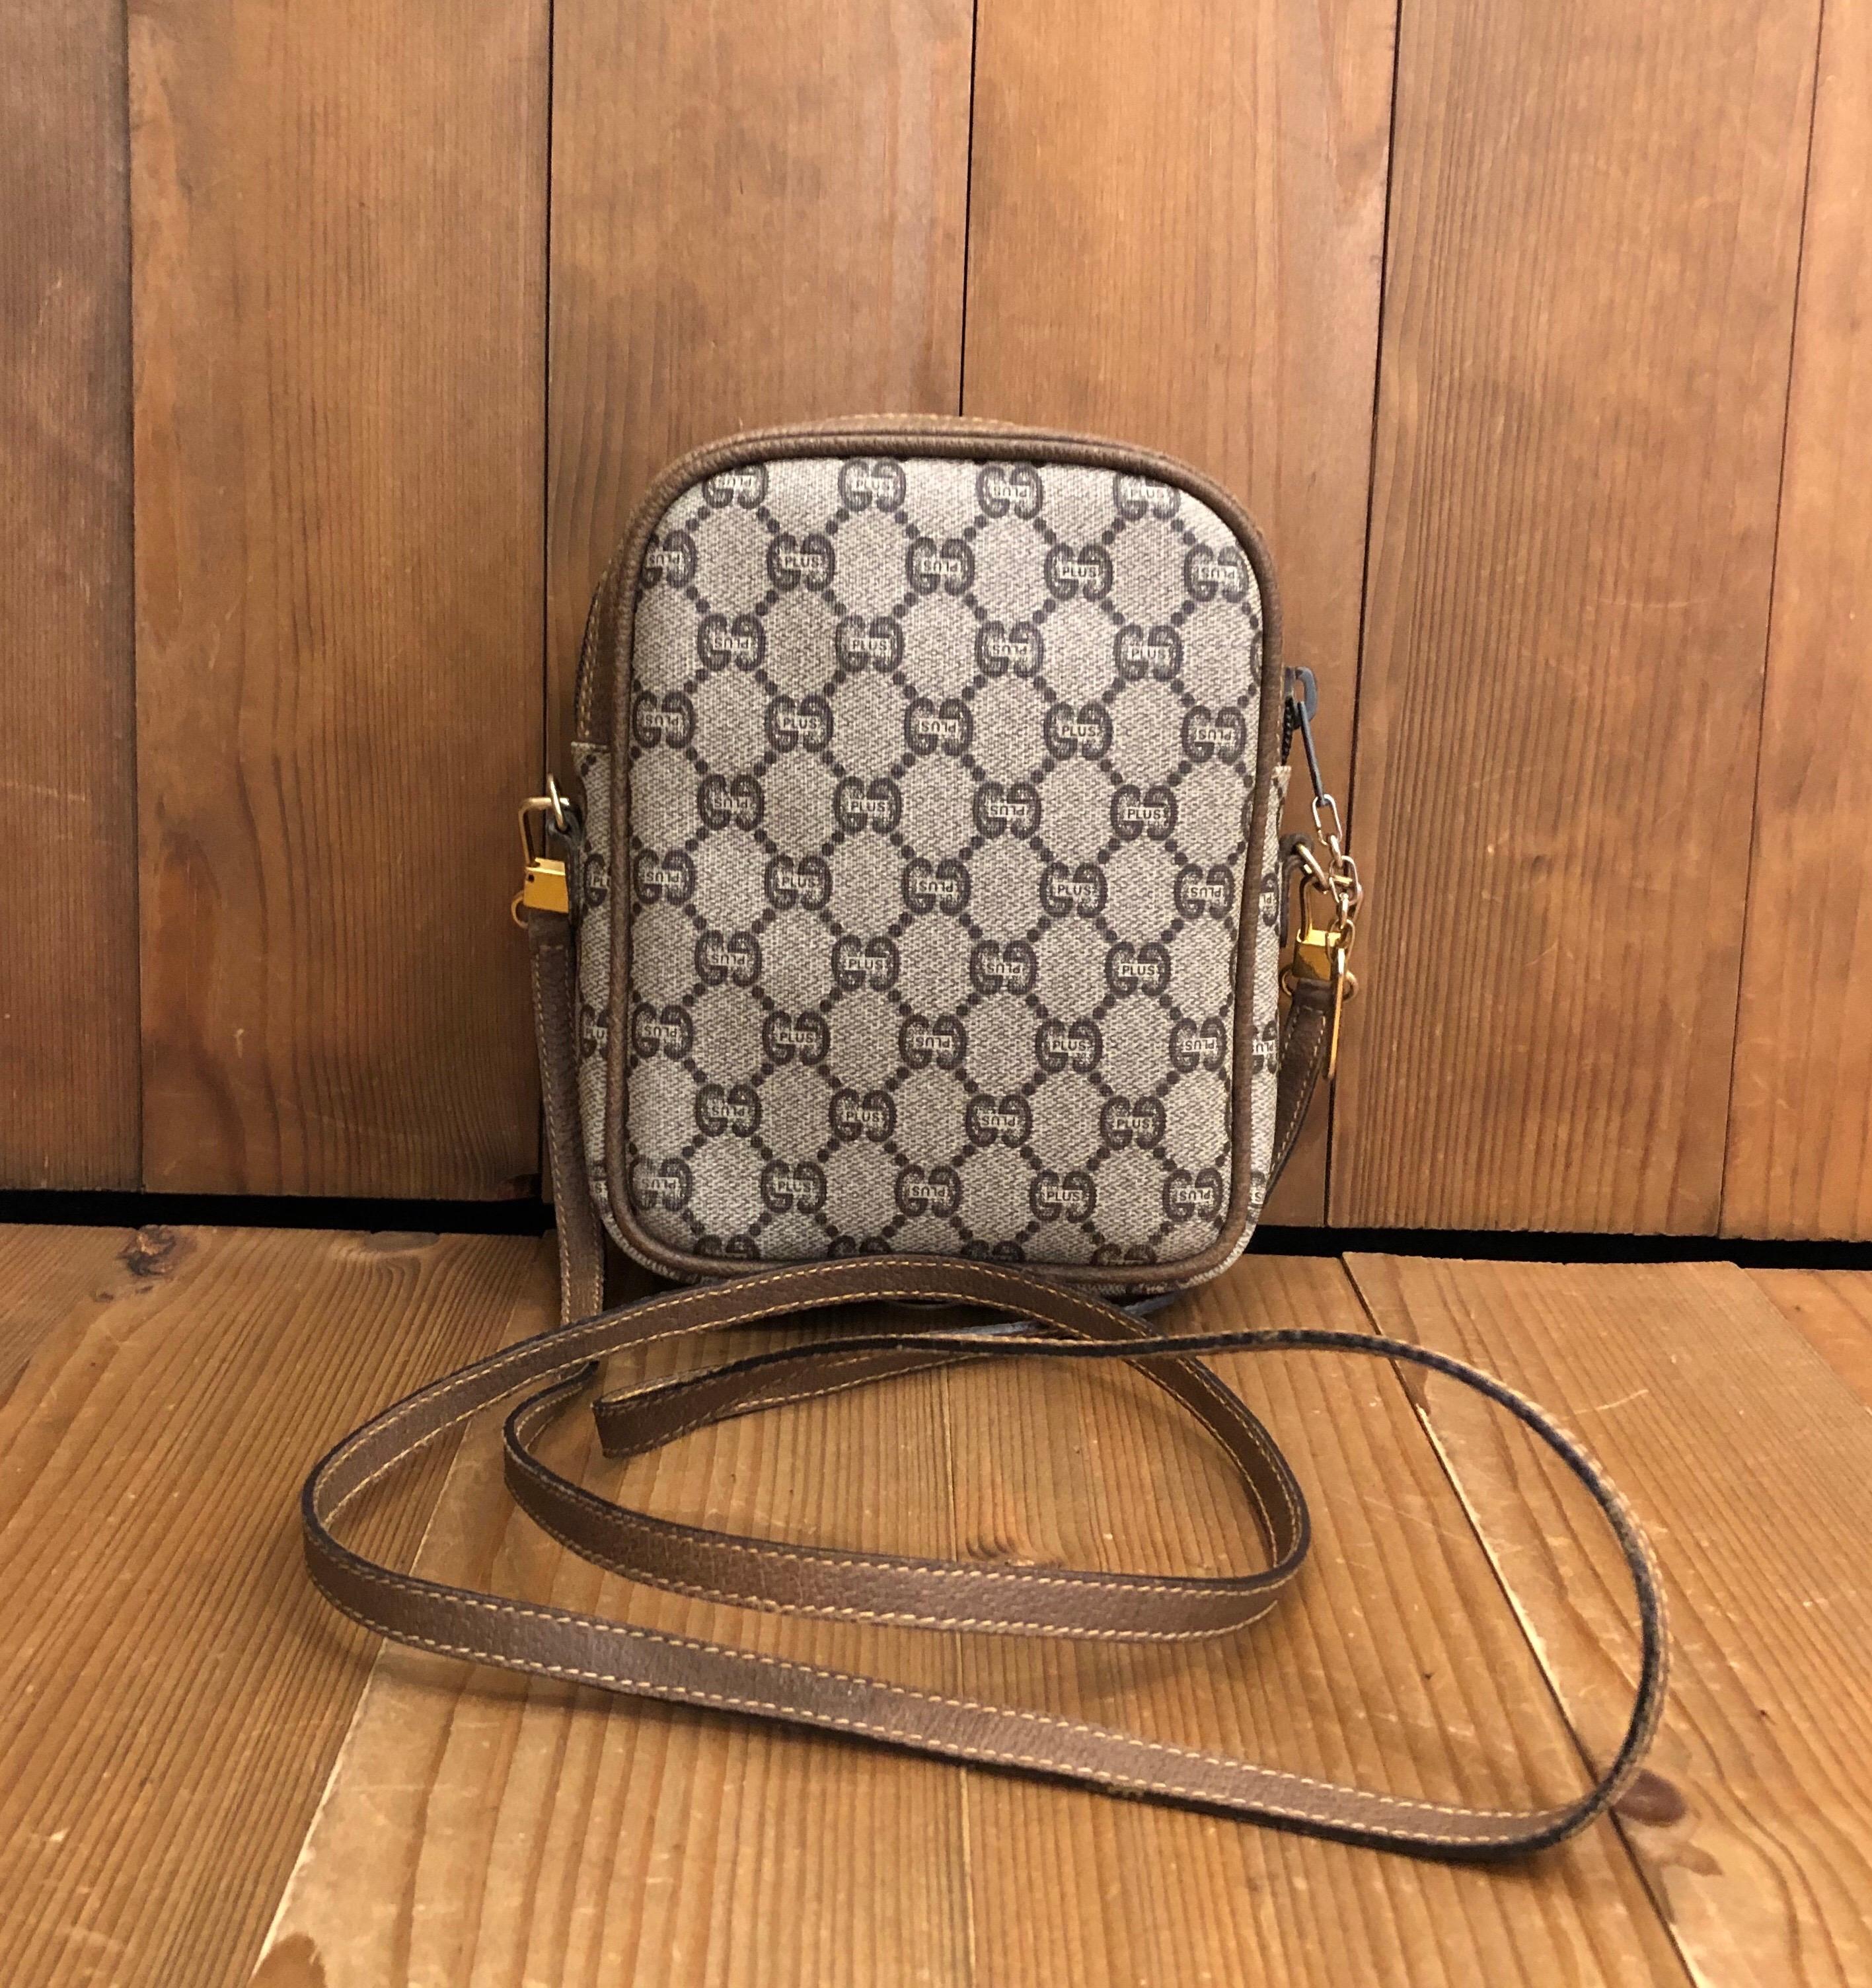 Paolo Gucci (son of Aldo and grandson of Guccio Gucci) started his own line called Gucci Plus in 1983. This line was only distributed in the United States for a short period of time. Comes with original detachable leather strap. This crossbody bag